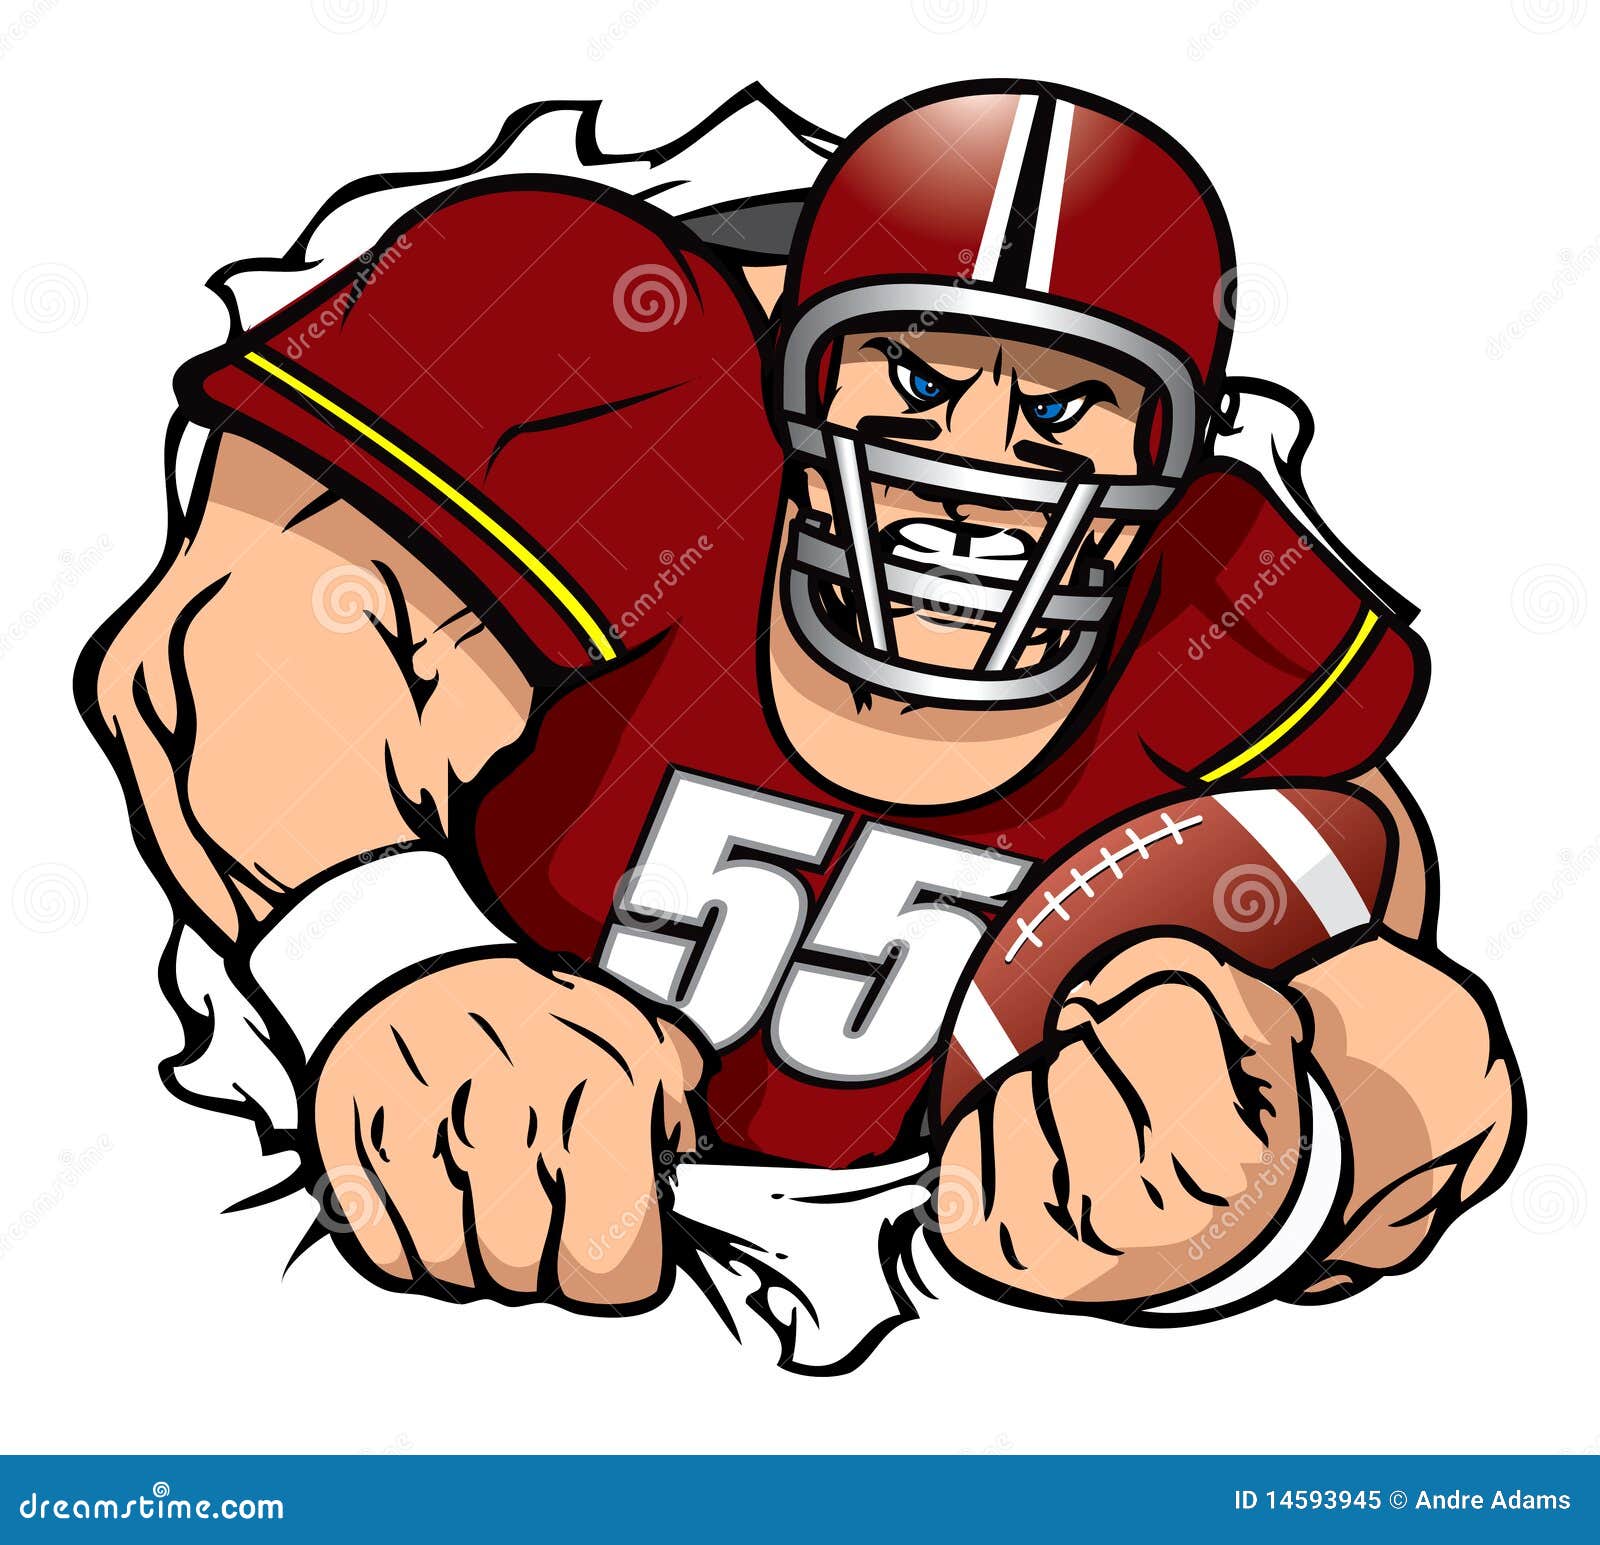 clipart of football player - photo #44